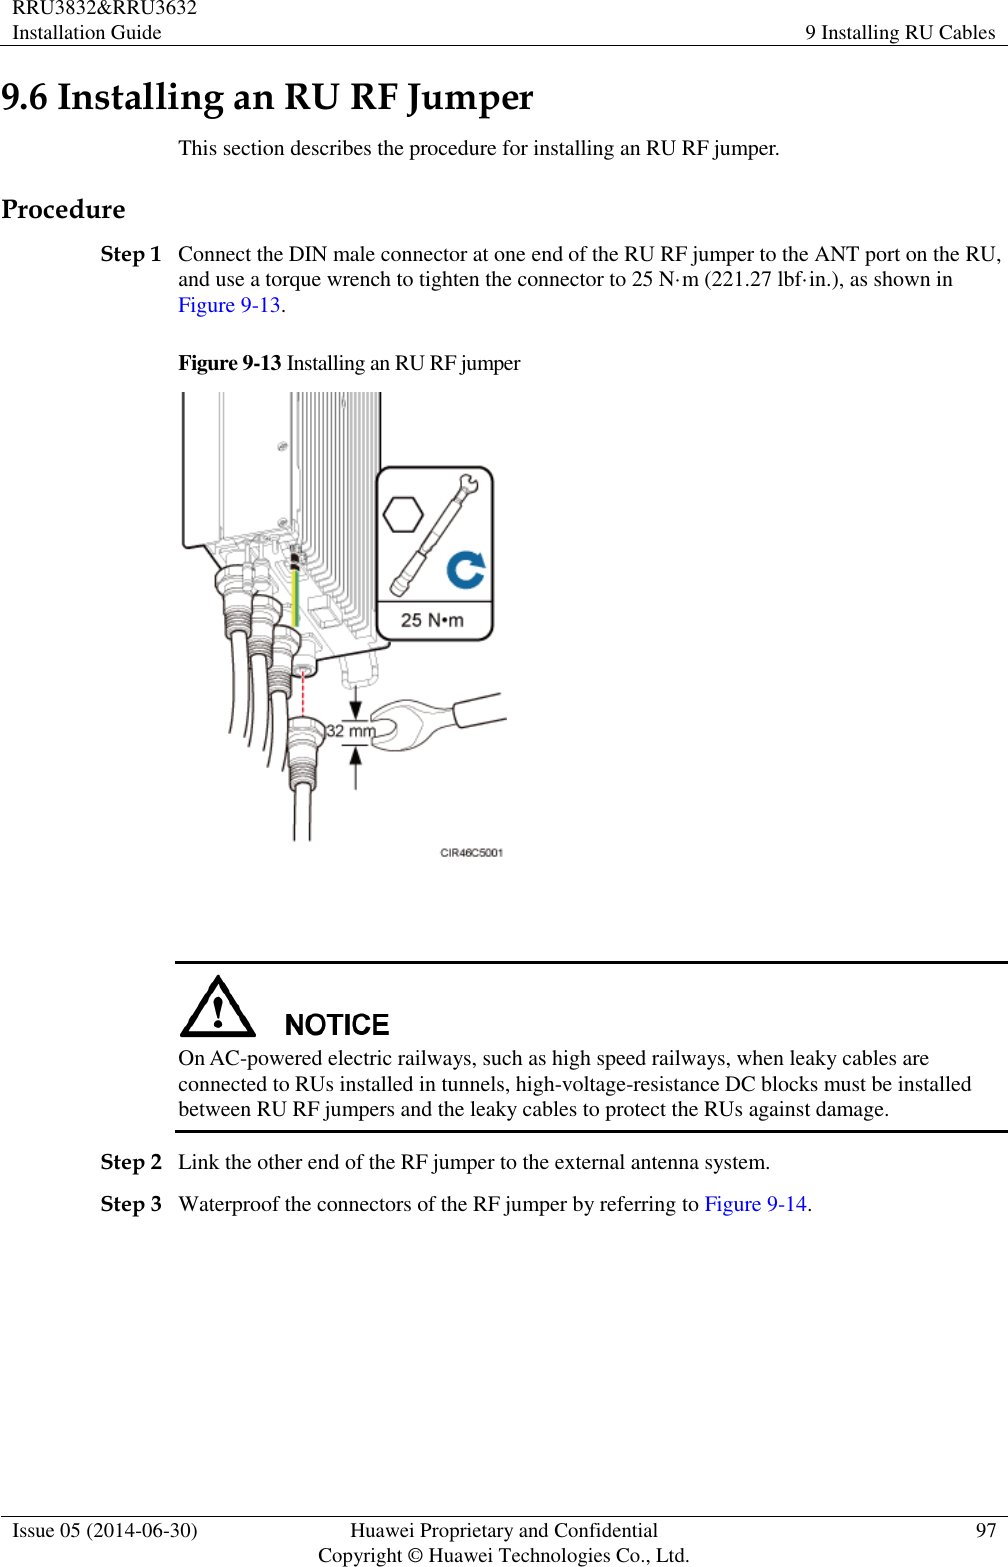 RRU3832&amp;RRU3632 Installation Guide 9 Installing RU Cables  Issue 05 (2014-06-30) Huawei Proprietary and Confidential                                     Copyright © Huawei Technologies Co., Ltd. 97  9.6 Installing an RU RF Jumper This section describes the procedure for installing an RU RF jumper. Procedure Step 1 Connect the DIN male connector at one end of the RU RF jumper to the ANT port on the RU, and use a torque wrench to tighten the connector to 25 N·m (221.27 lbf·in.), as shown in Figure 9-13. Figure 9-13 Installing an RU RF jumper     On AC-powered electric railways, such as high speed railways, when leaky cables are connected to RUs installed in tunnels, high-voltage-resistance DC blocks must be installed between RU RF jumpers and the leaky cables to protect the RUs against damage. Step 2 Link the other end of the RF jumper to the external antenna system. Step 3 Waterproof the connectors of the RF jumper by referring to Figure 9-14. 